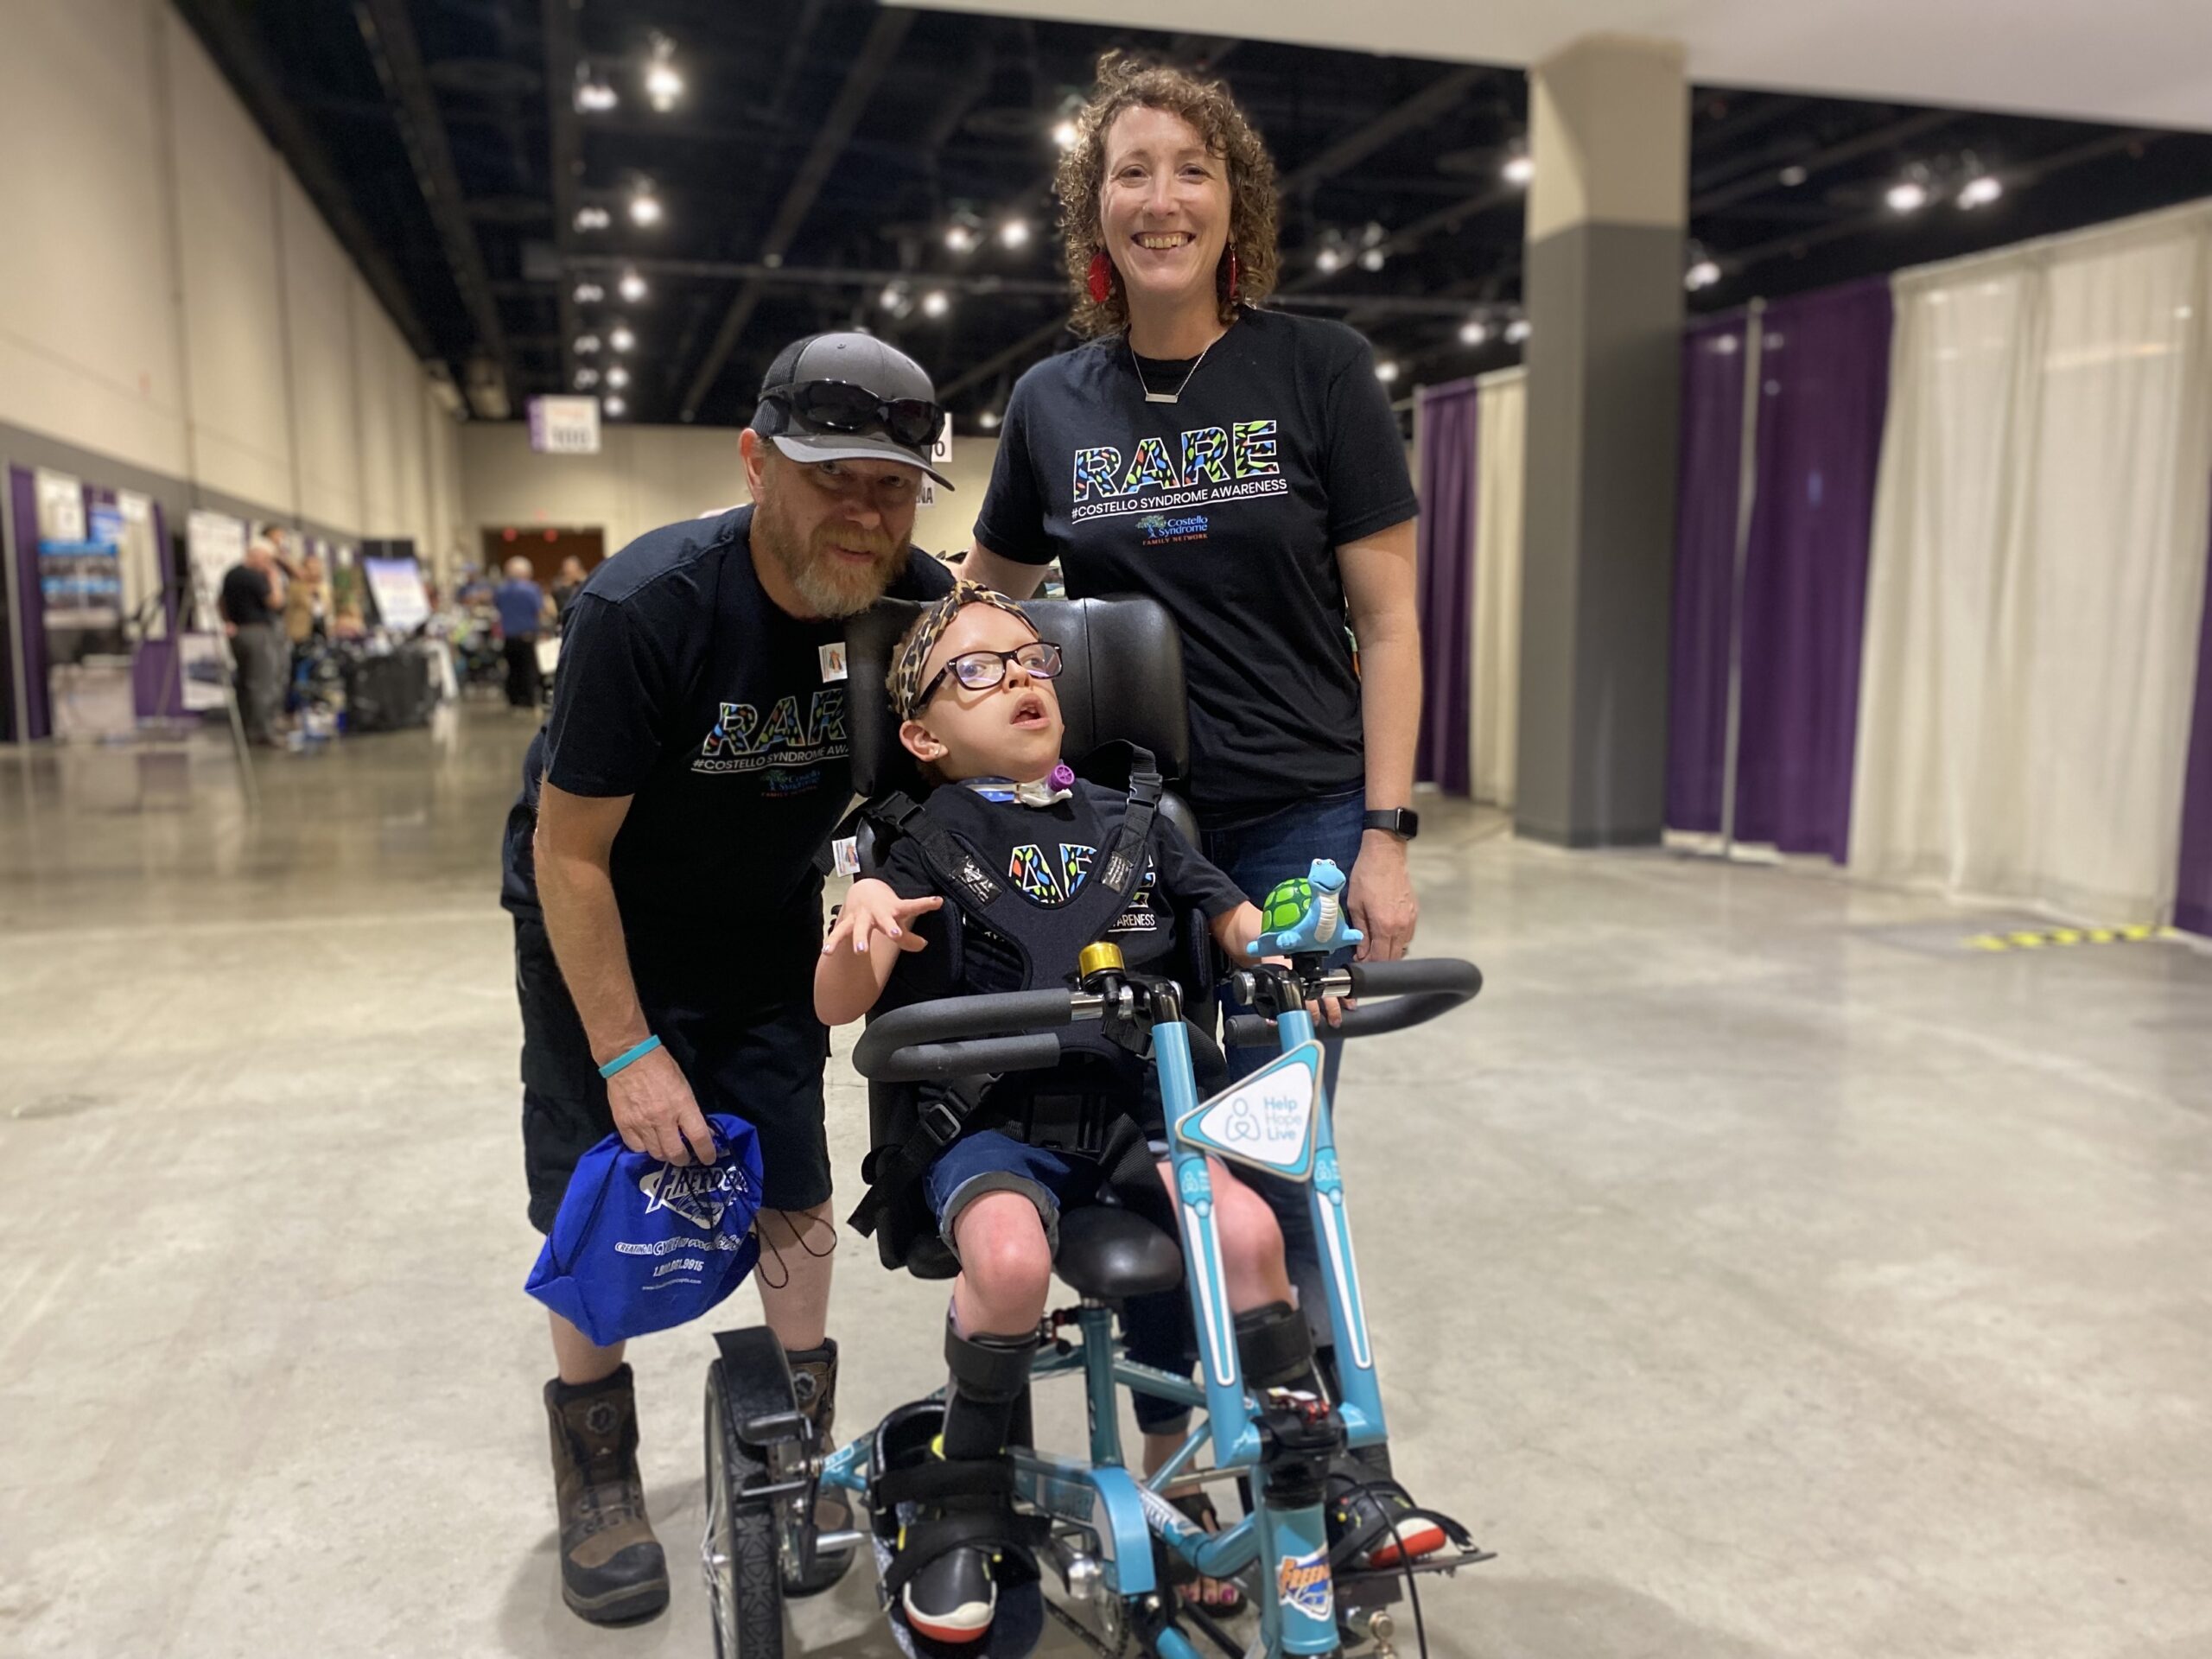 Anna-Stella Roberts is an 11-year-old with light skin and glasses who is sitting on her new adaptive bike in Help Hope Live teal. Her parents stand behind her with matching t-shirts that read RARE: Costello Syndrome Awareness. They are at Abilities Expo Chicago 2023.